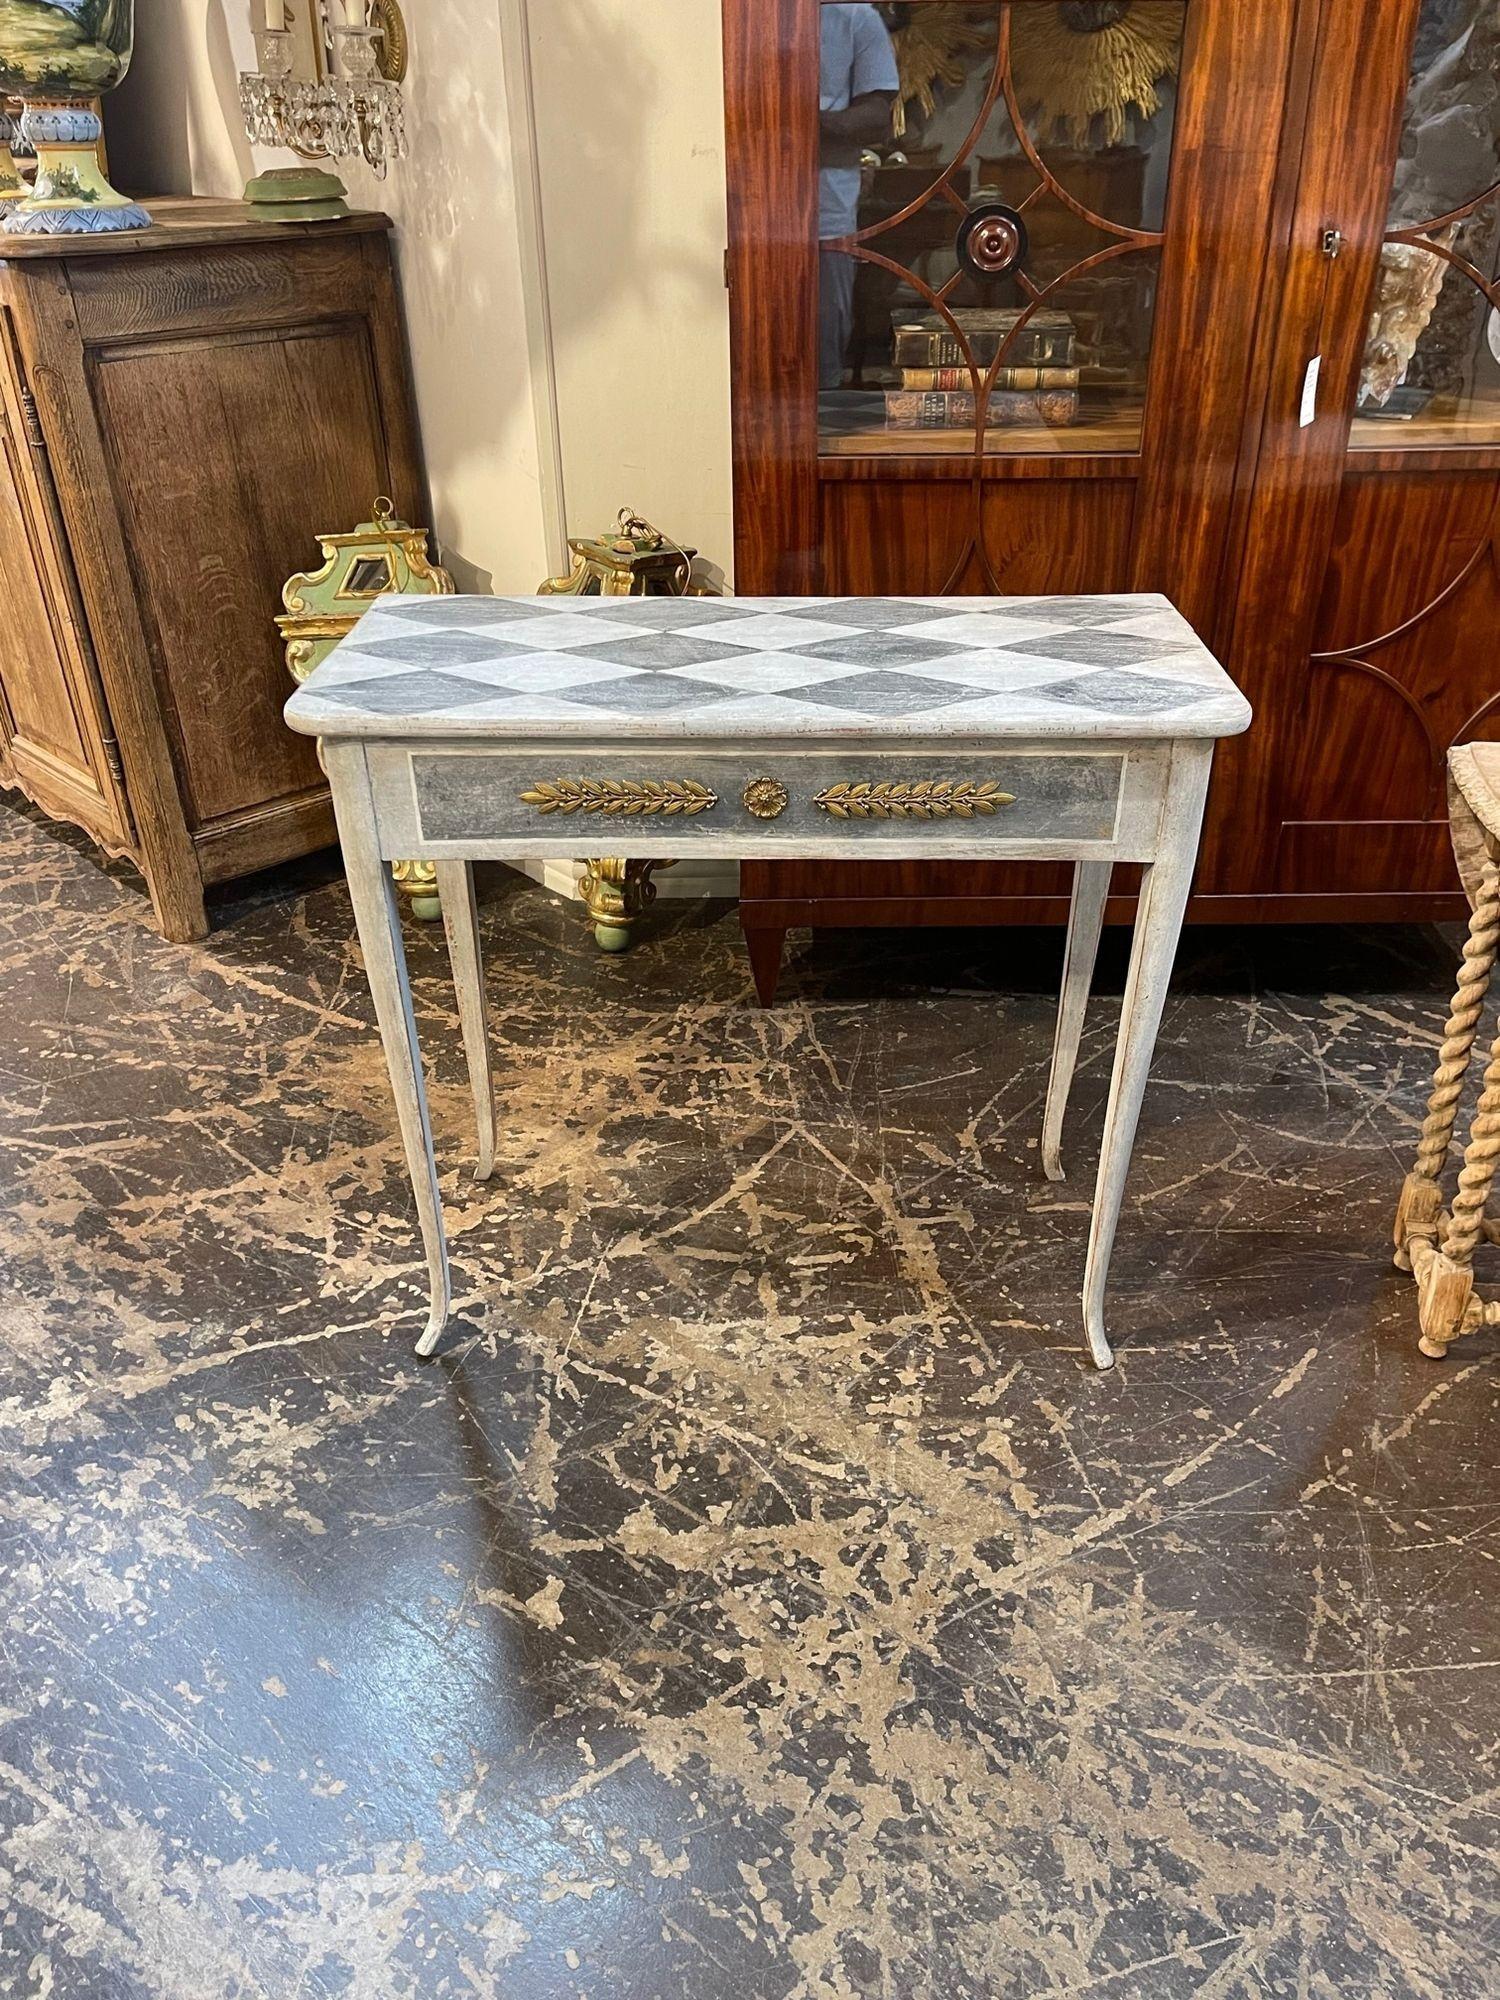 19th century Swedish Neo-classical painted console table. Circa 1880. Adds warmth and charm to any room!